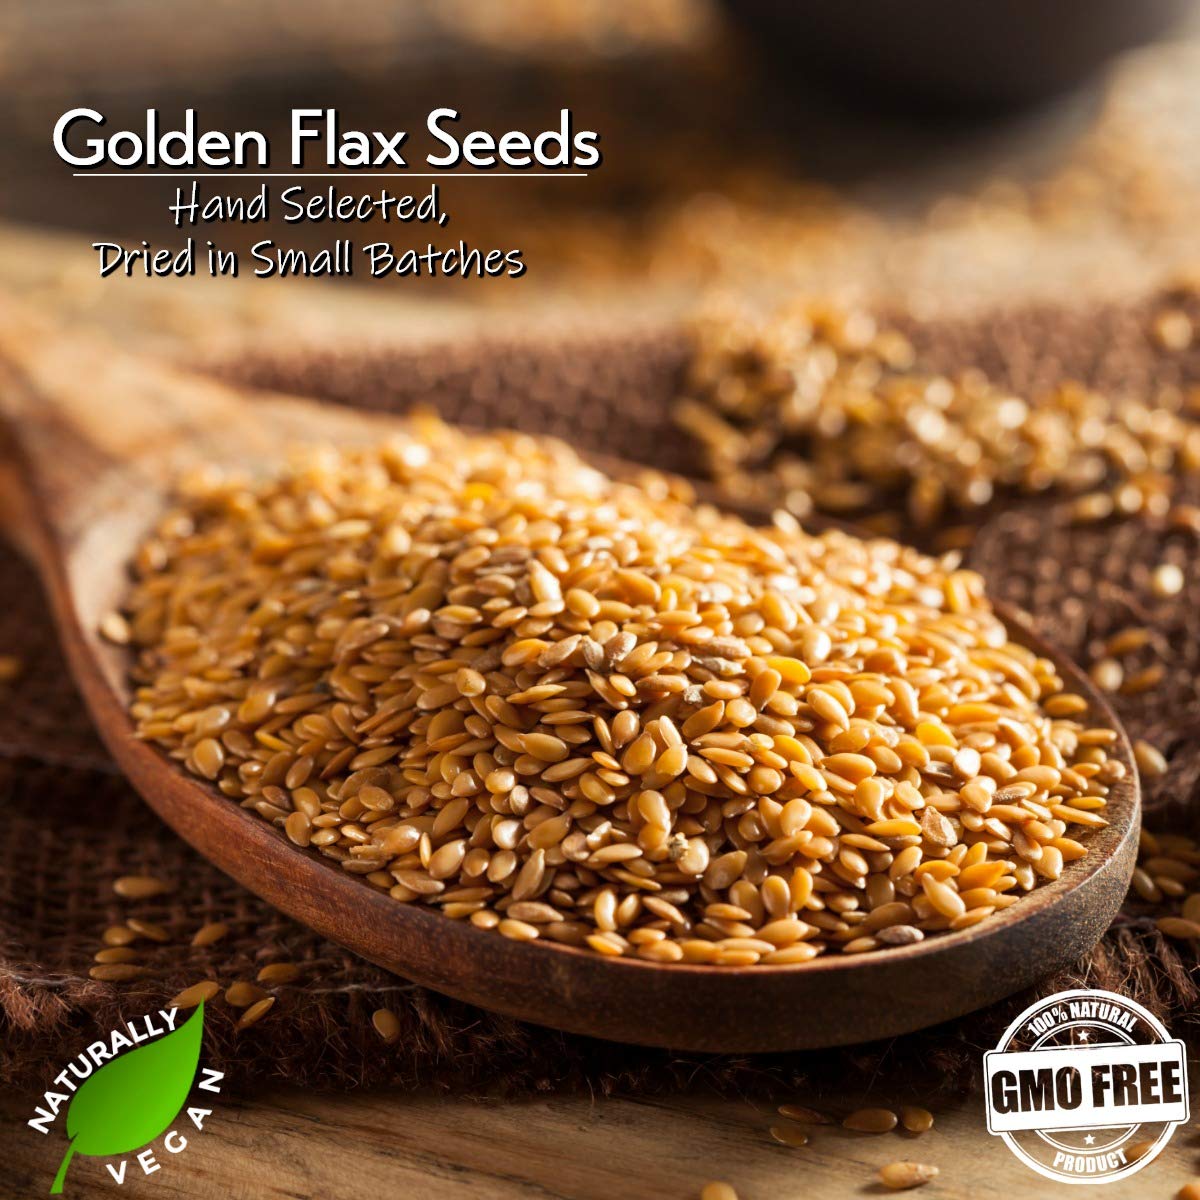 GERBS Raw Golden Flax Seeds 4 LBS. Premium Grade | Freshly Harvested flaxseed & Packaged in Resealable Bulk Bag | Non-GMO, Keto & Paleo Cleared |High in omega-3 fatty acids & Fiber| Gluten Peanut Free : Grocery & Gourmet Food